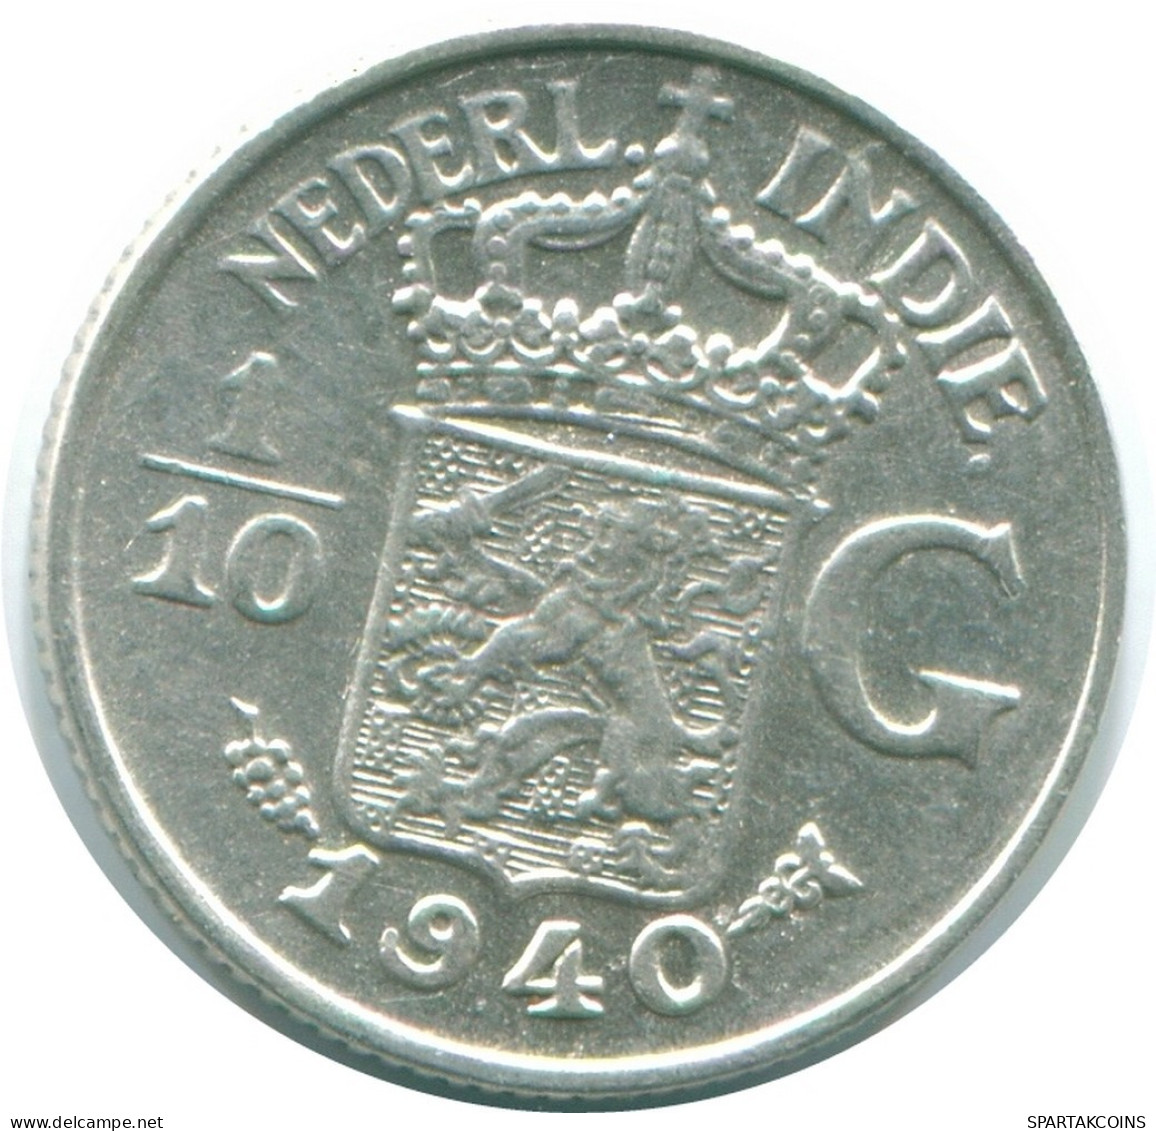 1/10 GULDEN 1940 NETHERLANDS EAST INDIES SILVER Colonial Coin #NL13530.3.U.A - Indes Neerlandesas